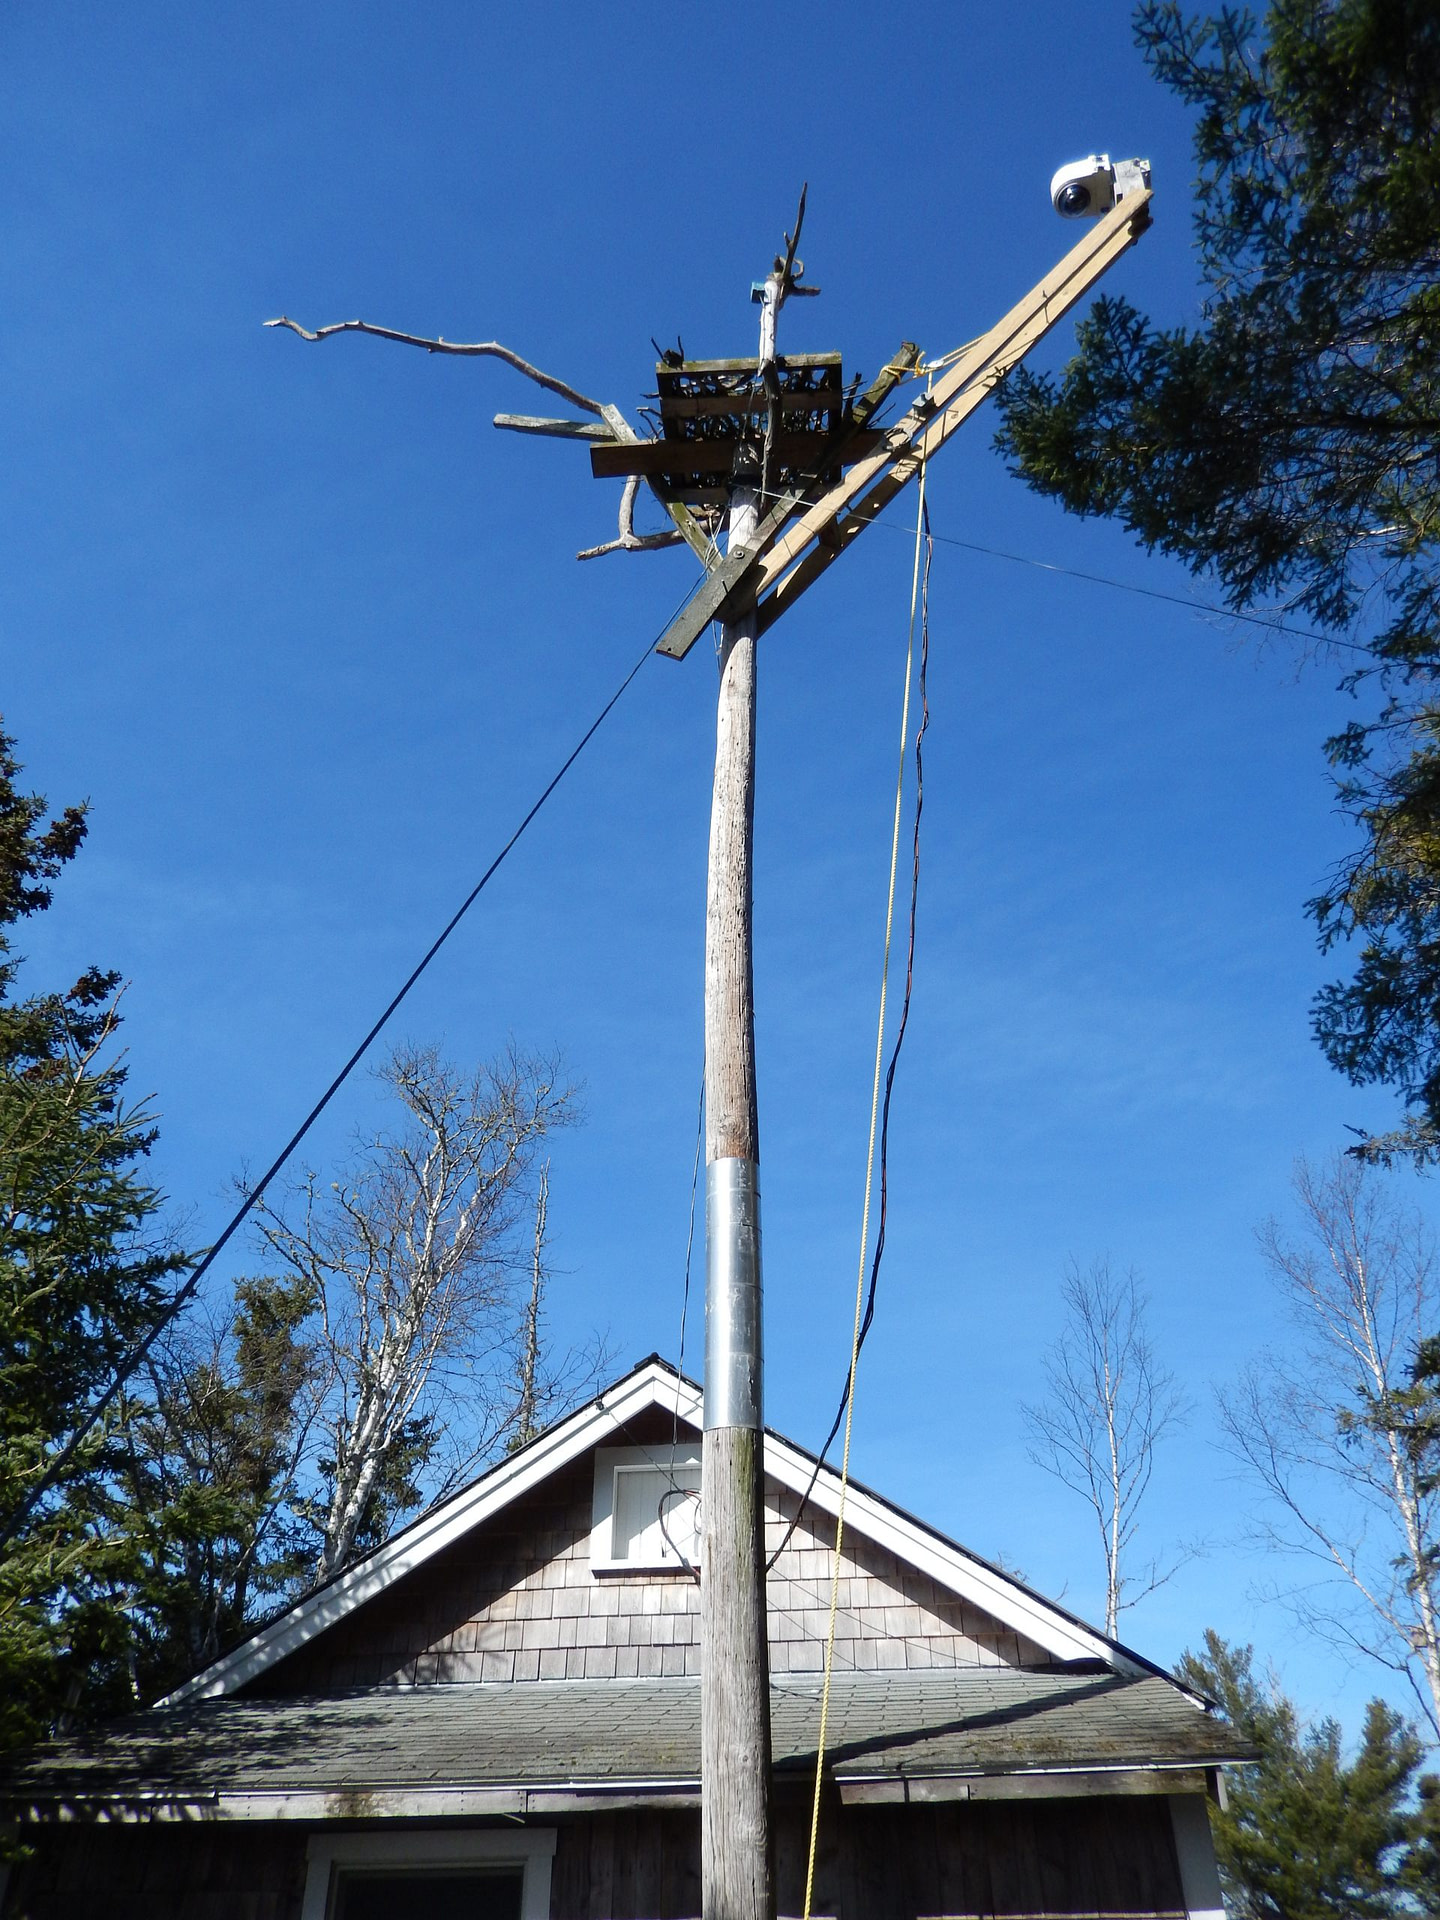 XMod PTZ Camera Enclosure System For Moderate Climate Conditions Installed On Hog Island Overlooking An Osprey Nest In Bremen Maine 